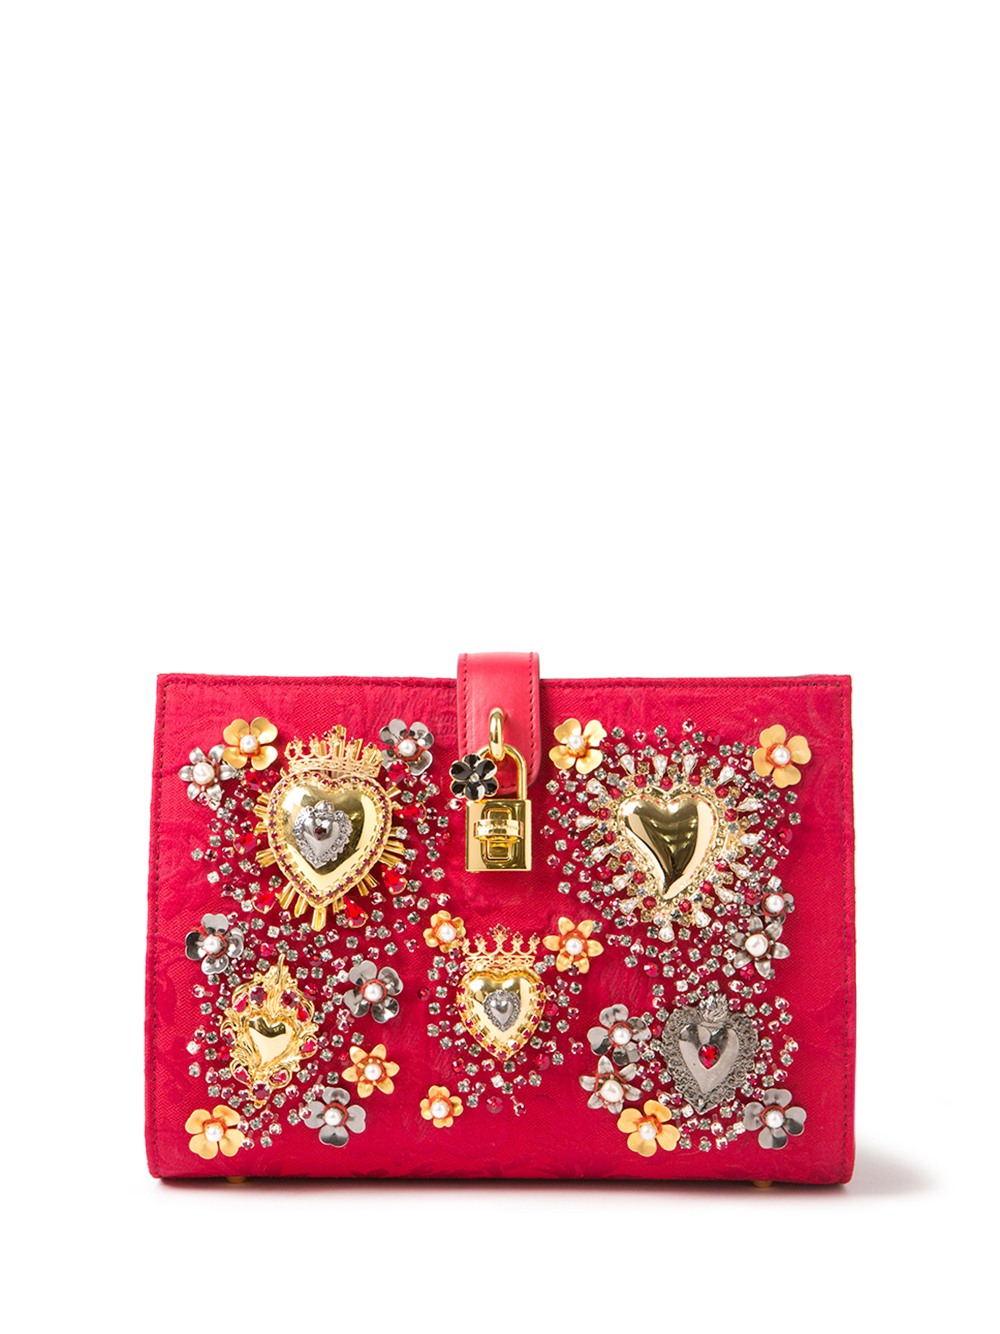 Lyst - Dolce & gabbana Embellished Clutch in Red